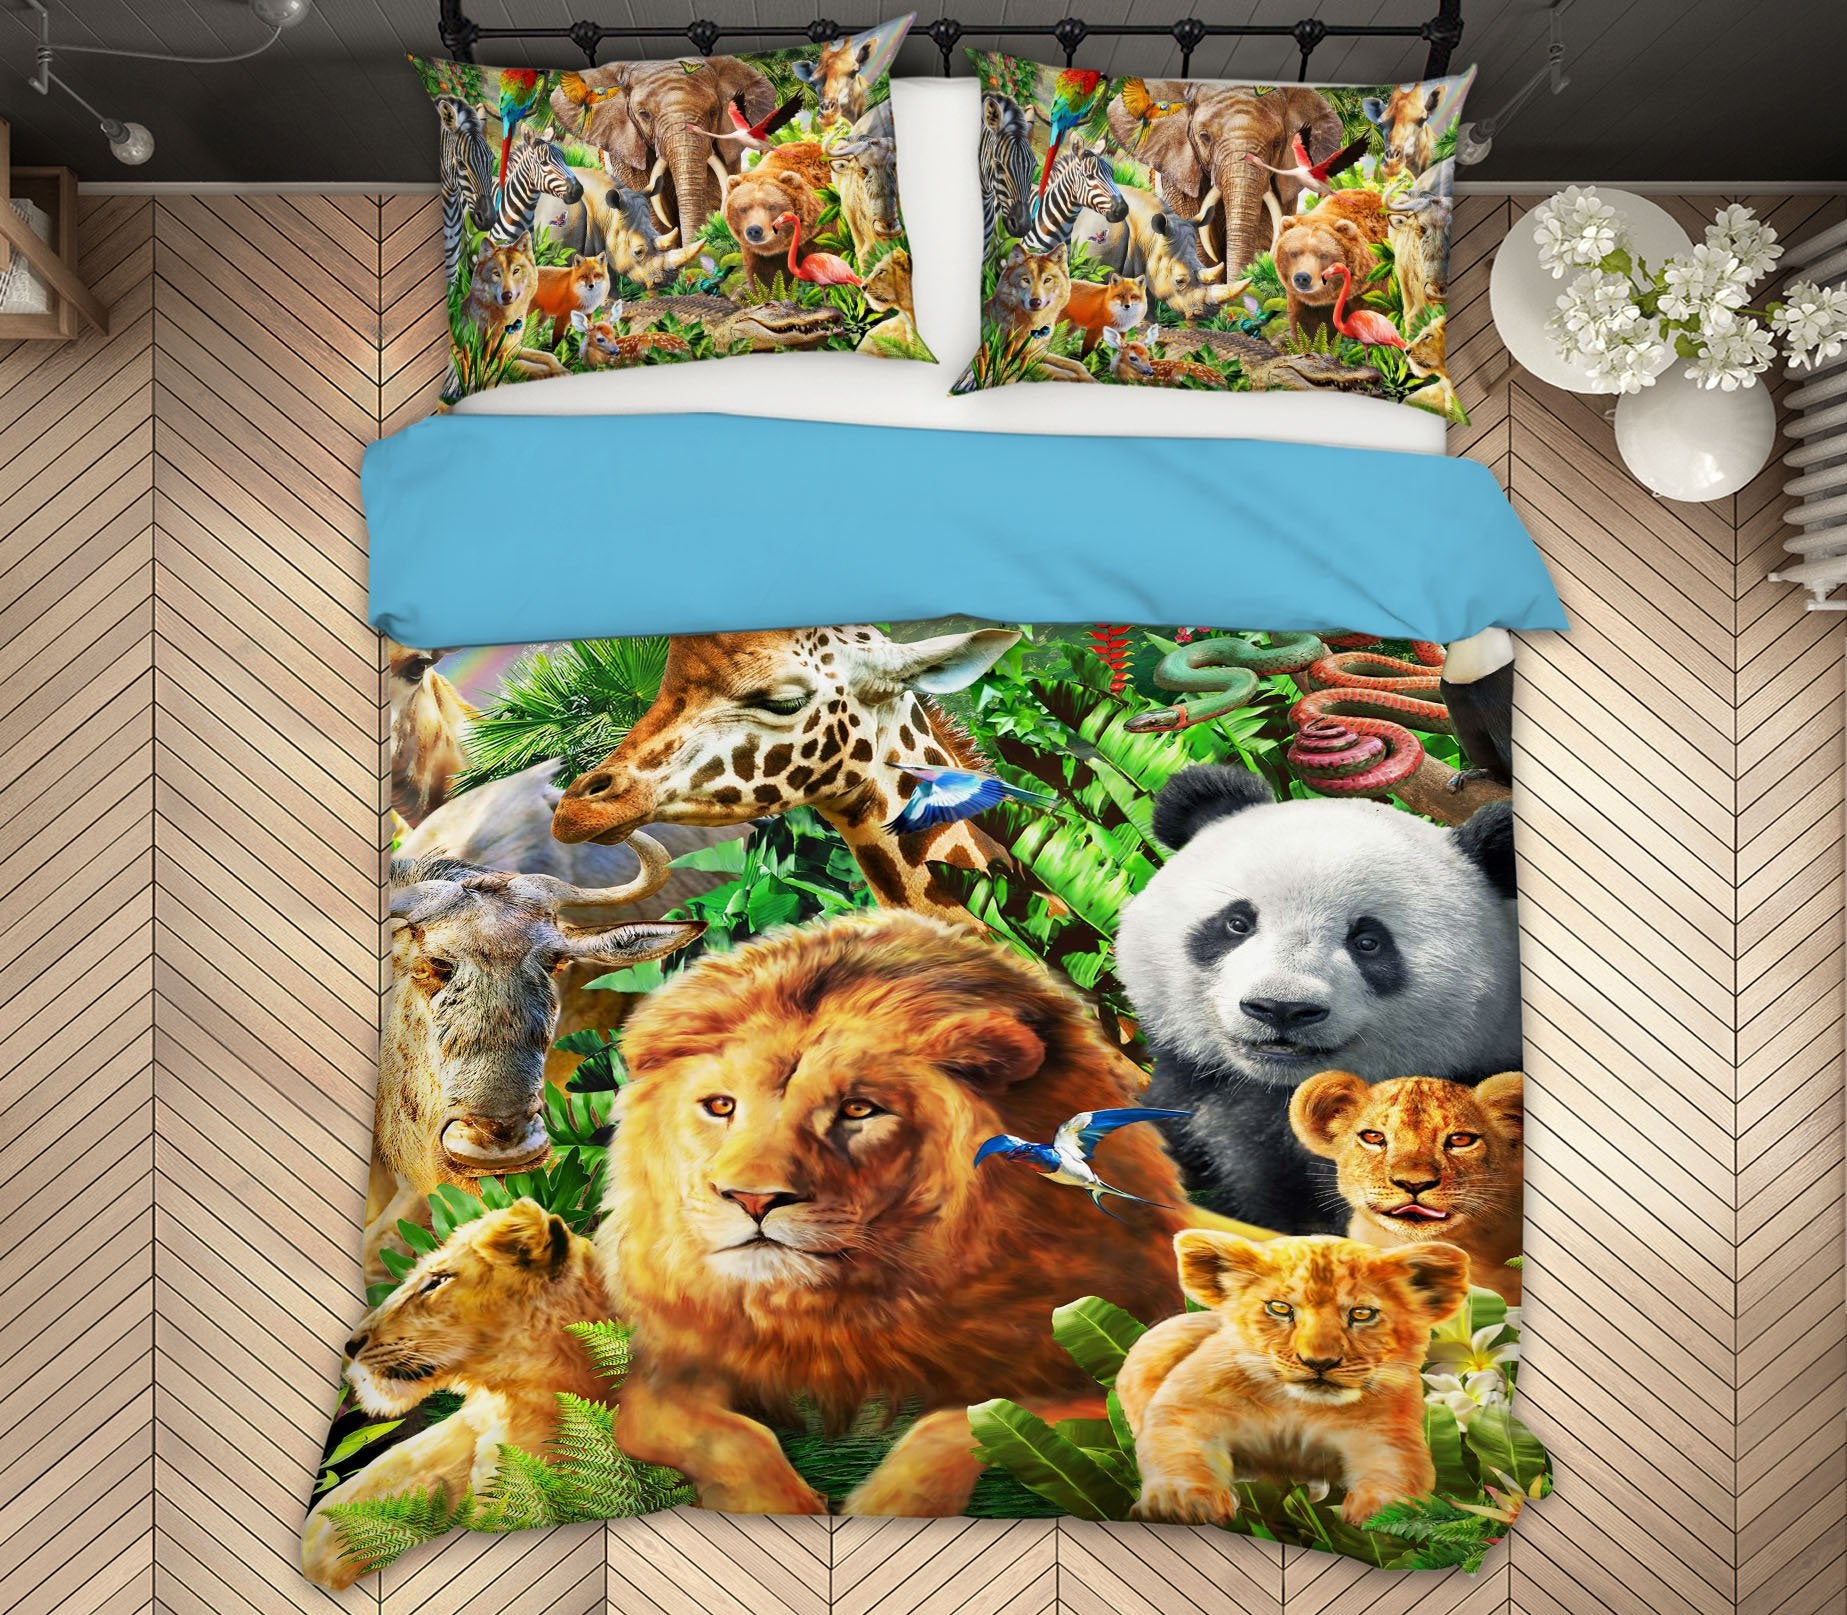 3D Animal World 2131 Adrian Chesterman Bedding Bed Pillowcases Quilt Quiet Covers AJ Creativity Home 